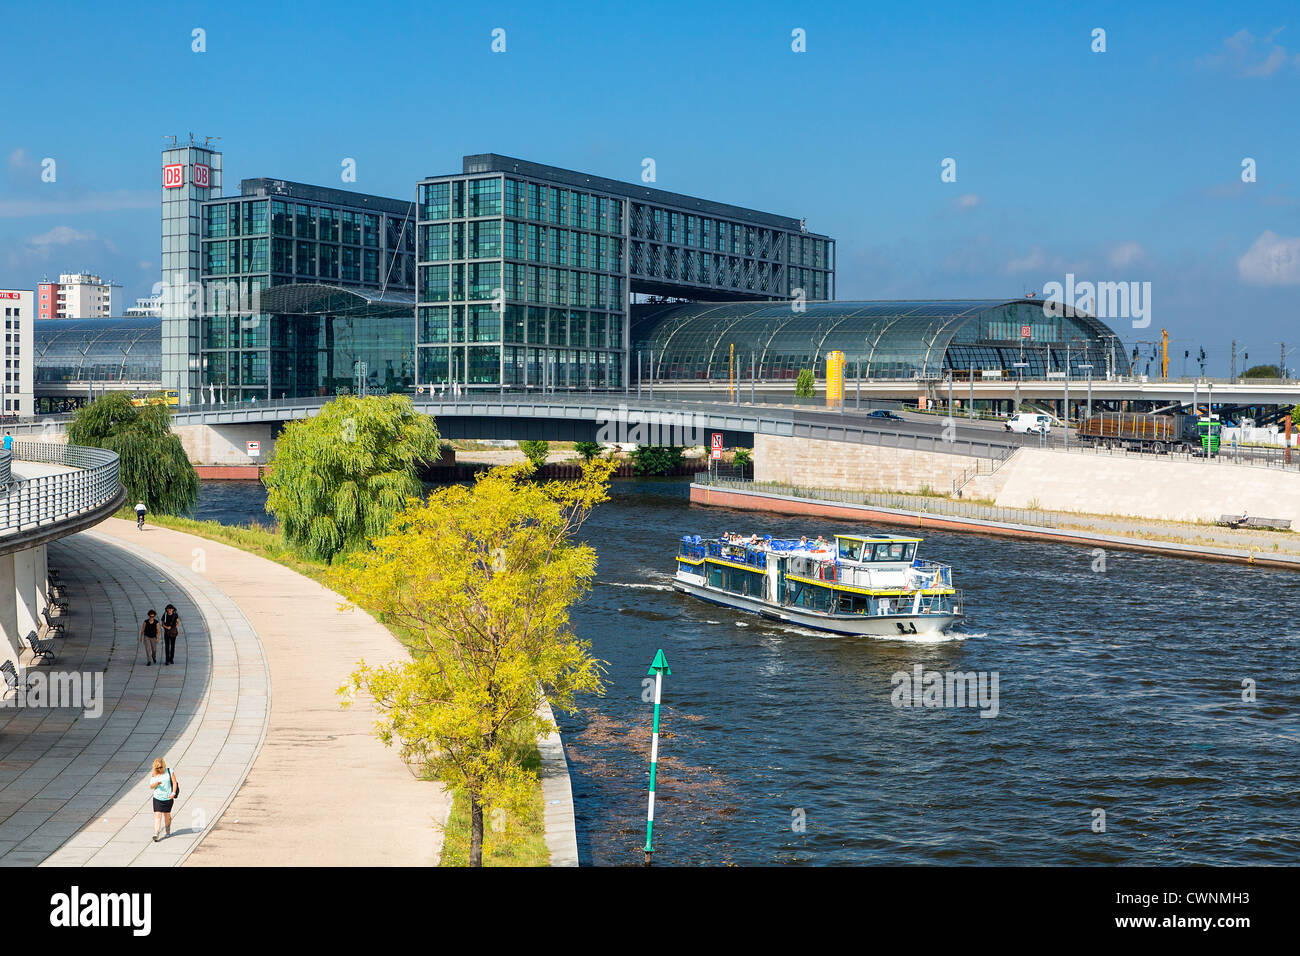 Europe, Germany, Berlin, A tour boat on the Spree River, on the background the Berlin Hauptbahnhof (Central Station) Stock Photo